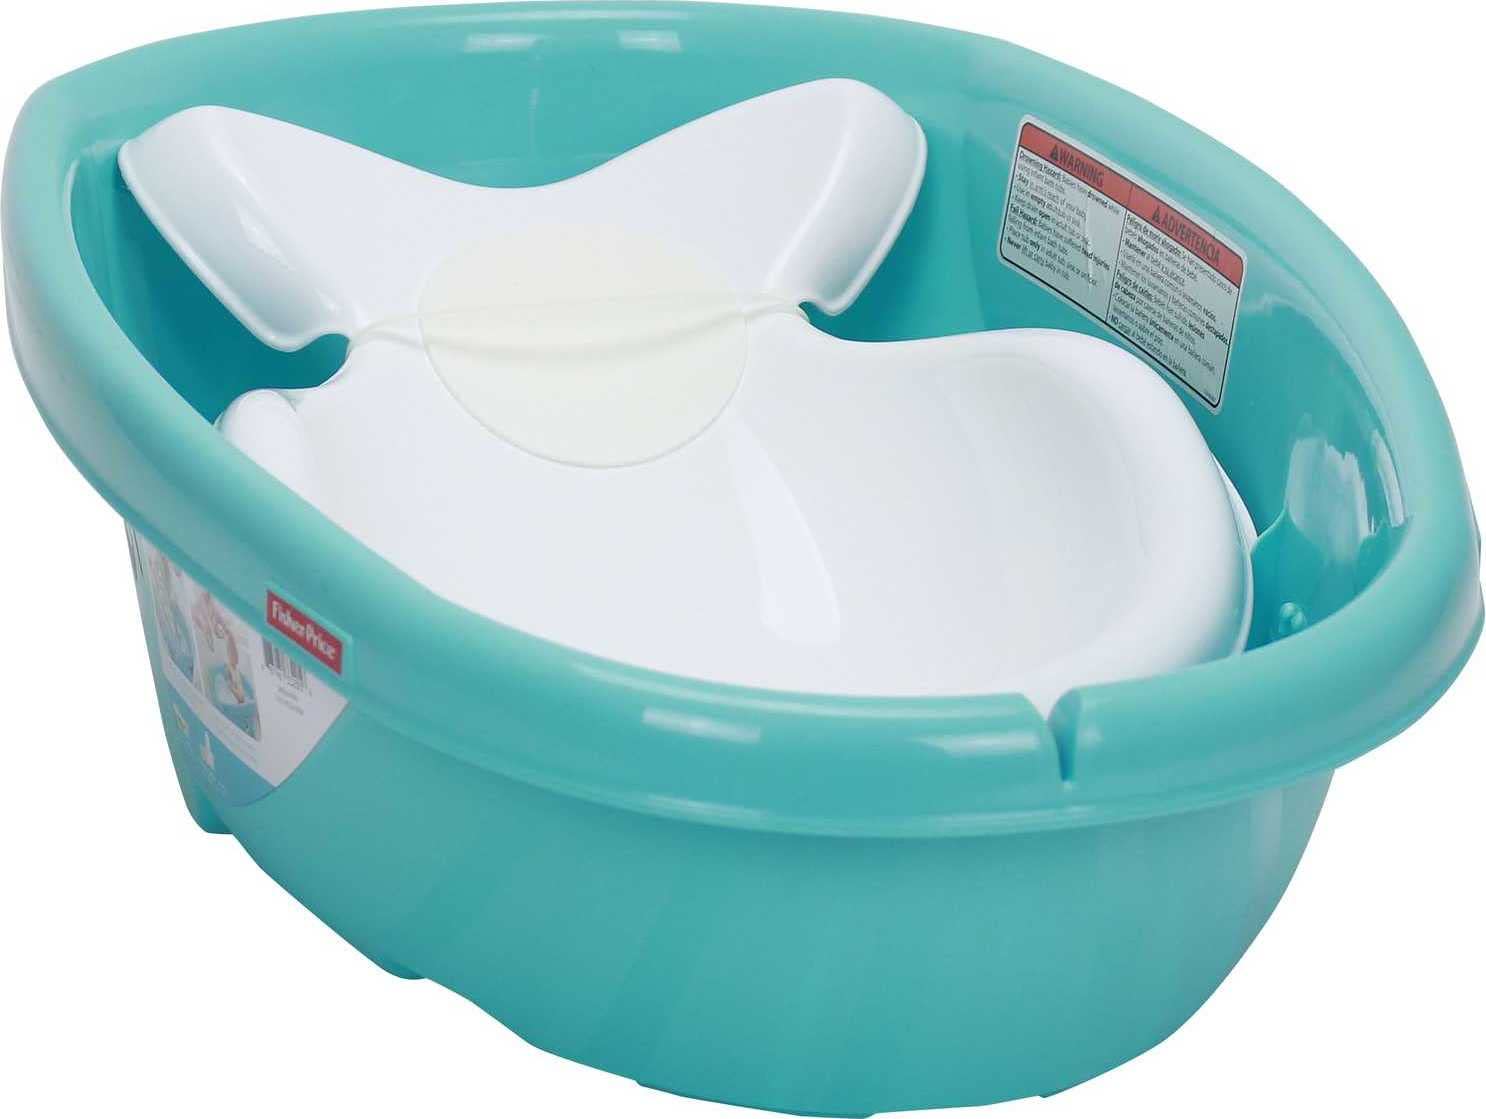 Fisher-Price Baby to Toddler Bath Whale of A Tub with Removable Infant Seat and Drain Plug, Fits Most Sinks